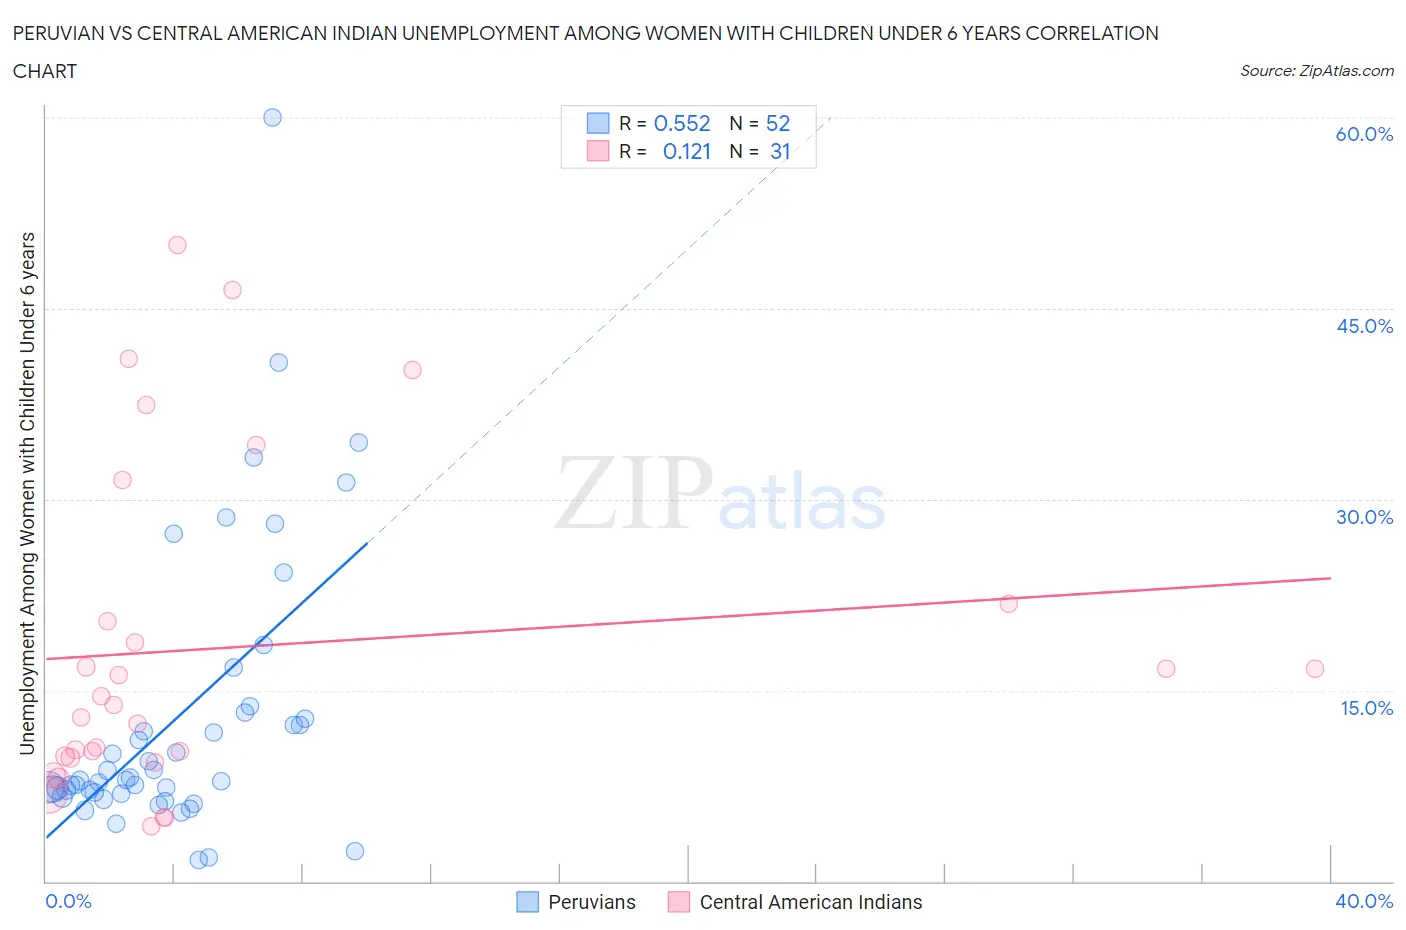 Peruvian vs Central American Indian Unemployment Among Women with Children Under 6 years